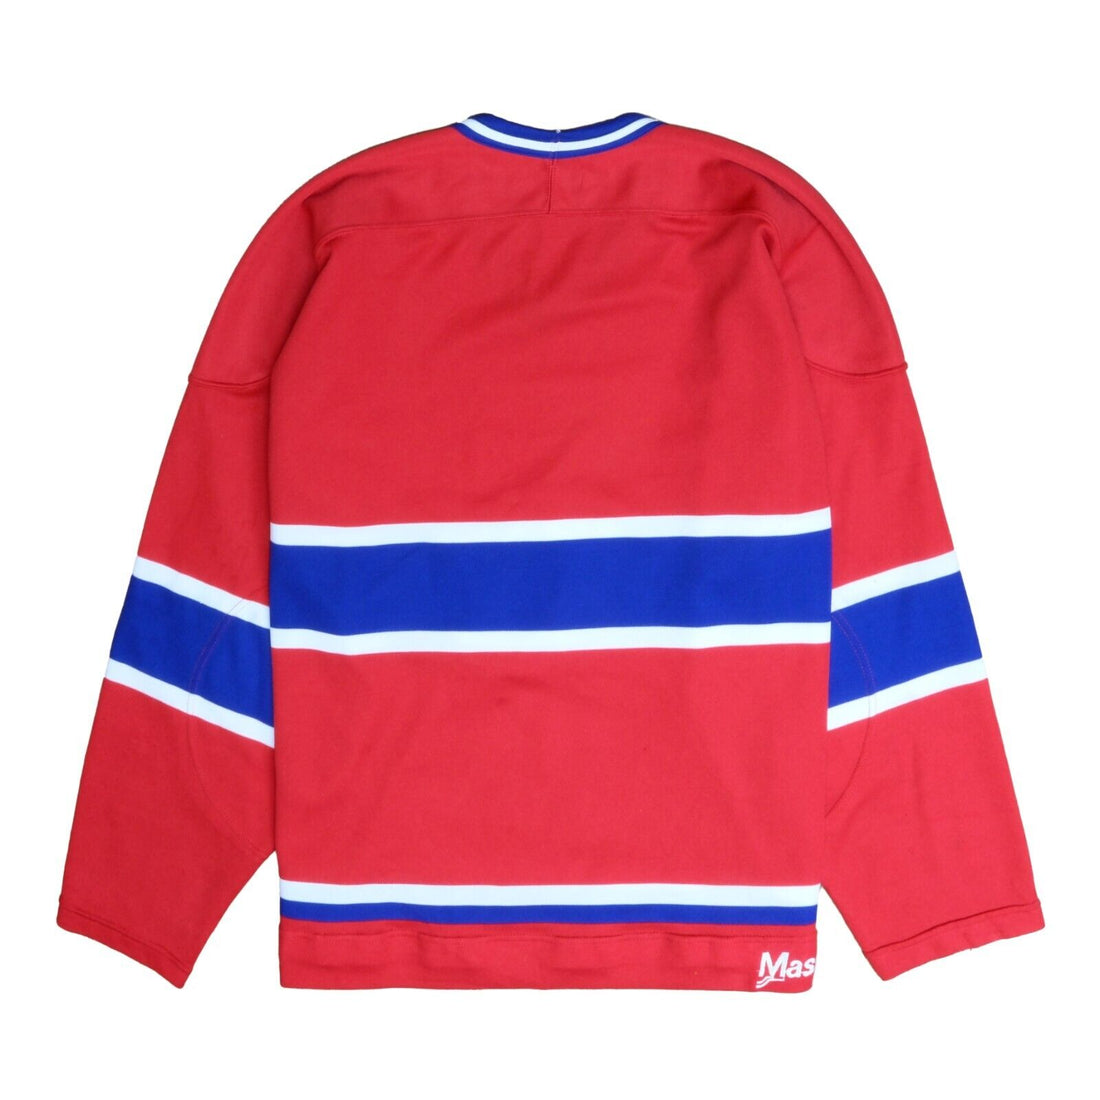 Vintage Montreal Canadiens CCM Maska Jersey Size 2XL Red 90s NHL